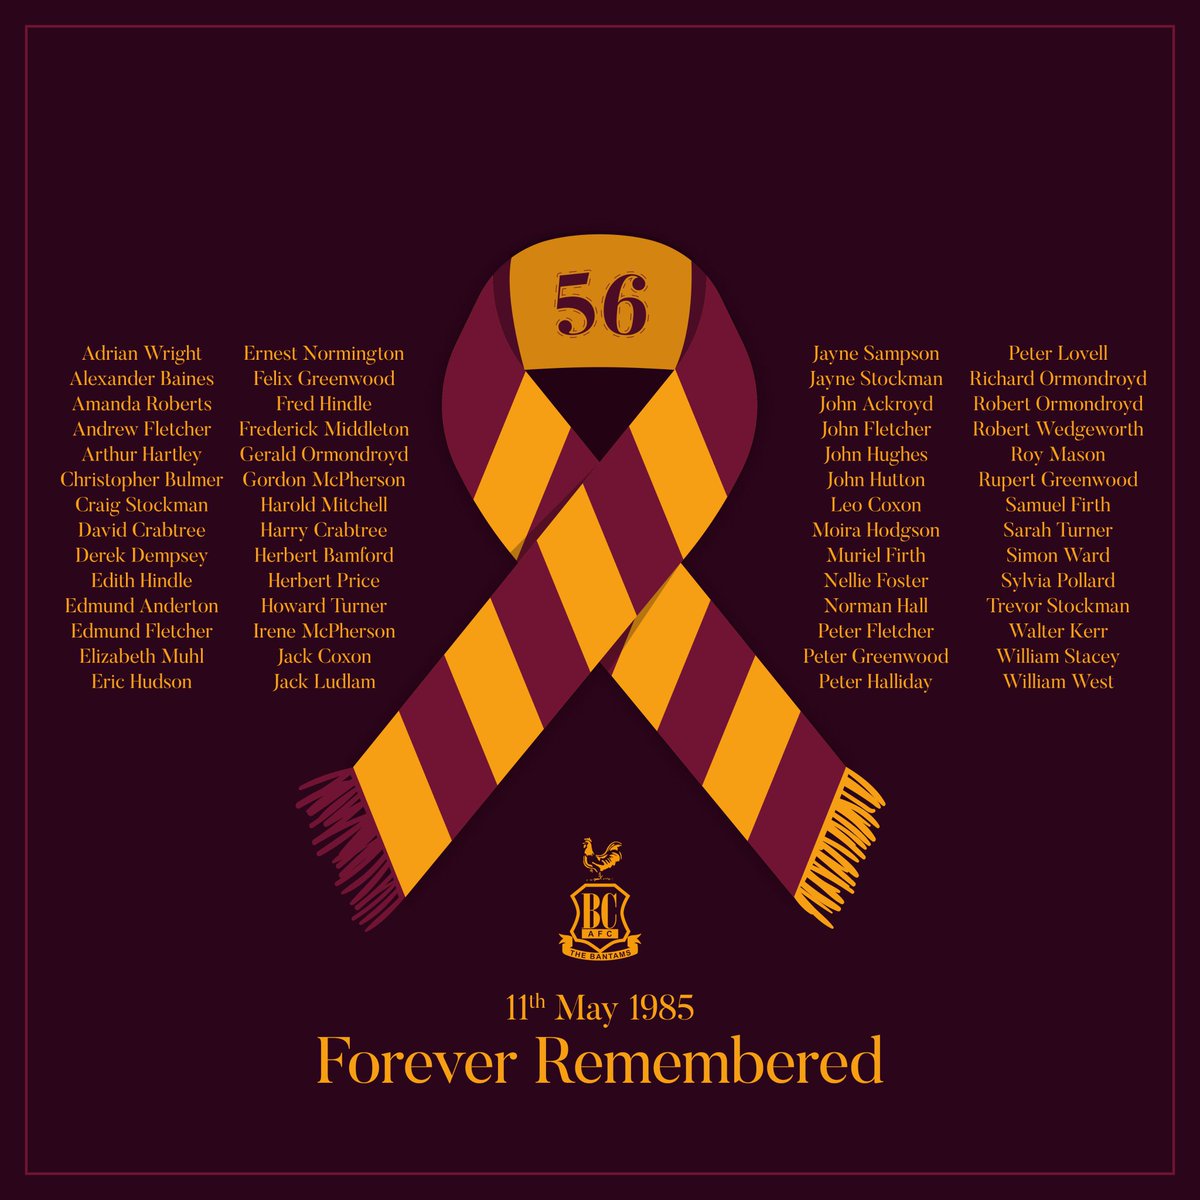 Never forget the 56 fans that died, the 250+ injured, friends & families of those impacted by this terrible disaster.

56 went to a game of football and never got to go home to their loved ones.

39 years ago. Will always remember them & this day.

11/05/85 #RIP #BCAFC ❤💙